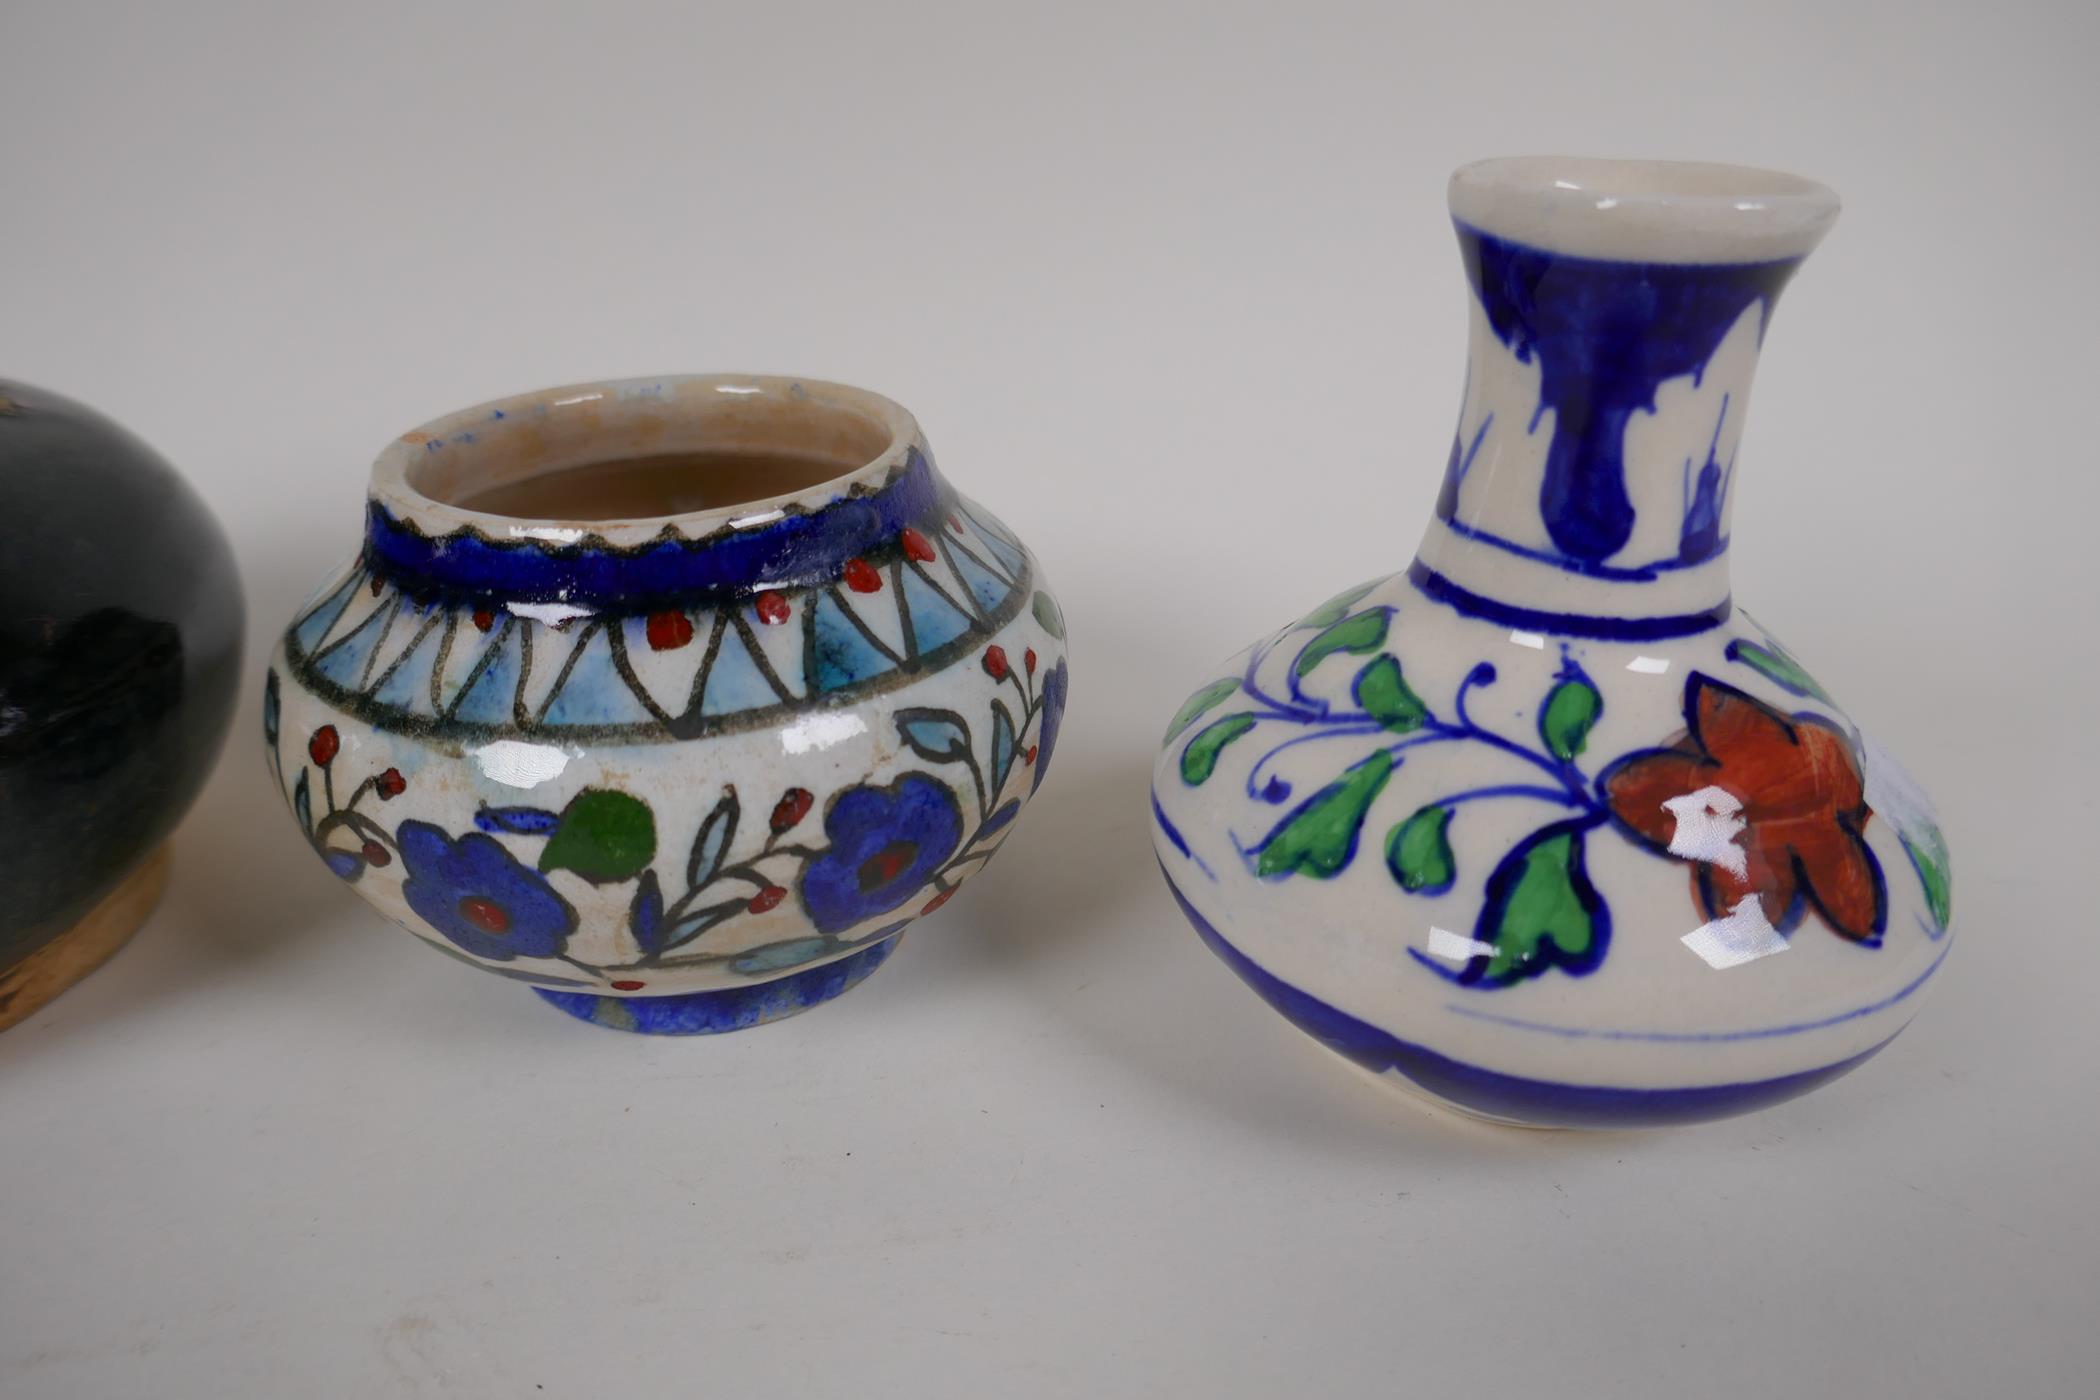 Two Indian pottery squat jars, a similar eastern jar and a vase, 4" high - Image 4 of 6